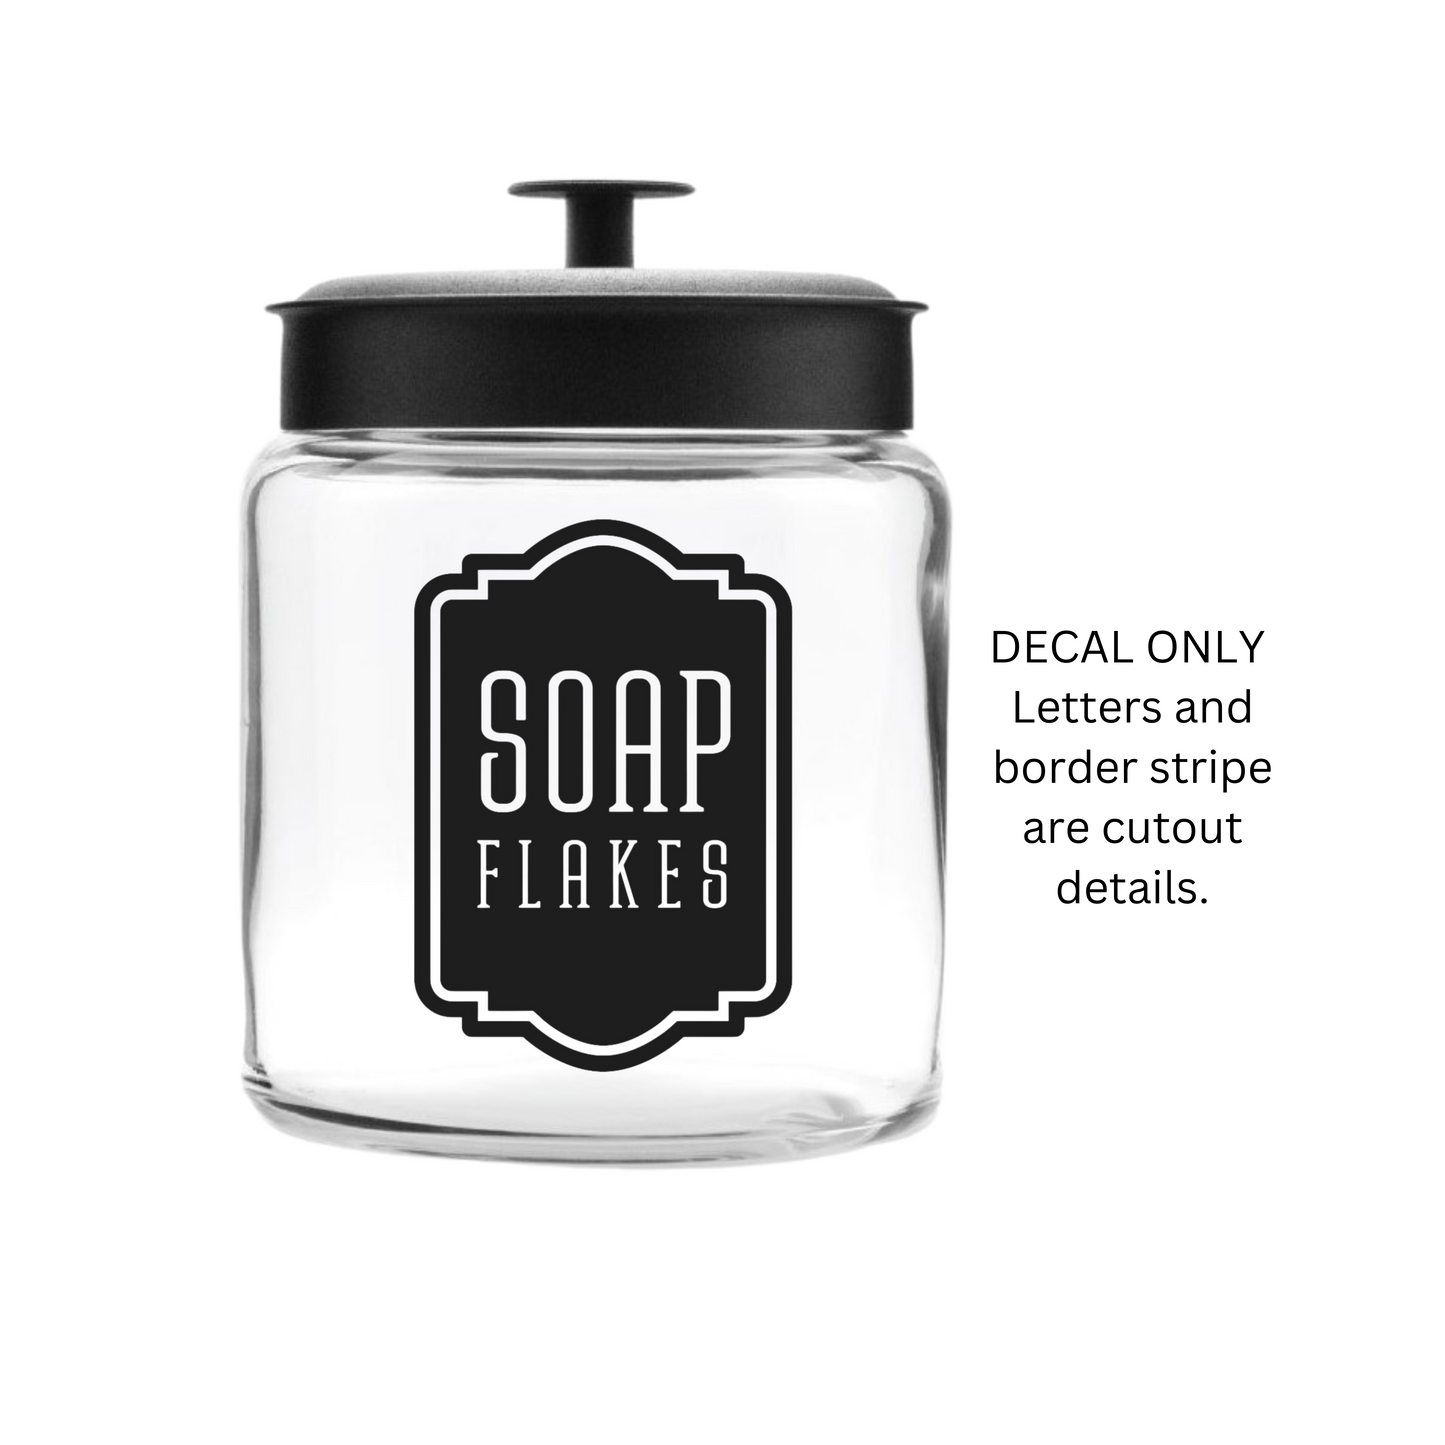 Soap Flakes Decal